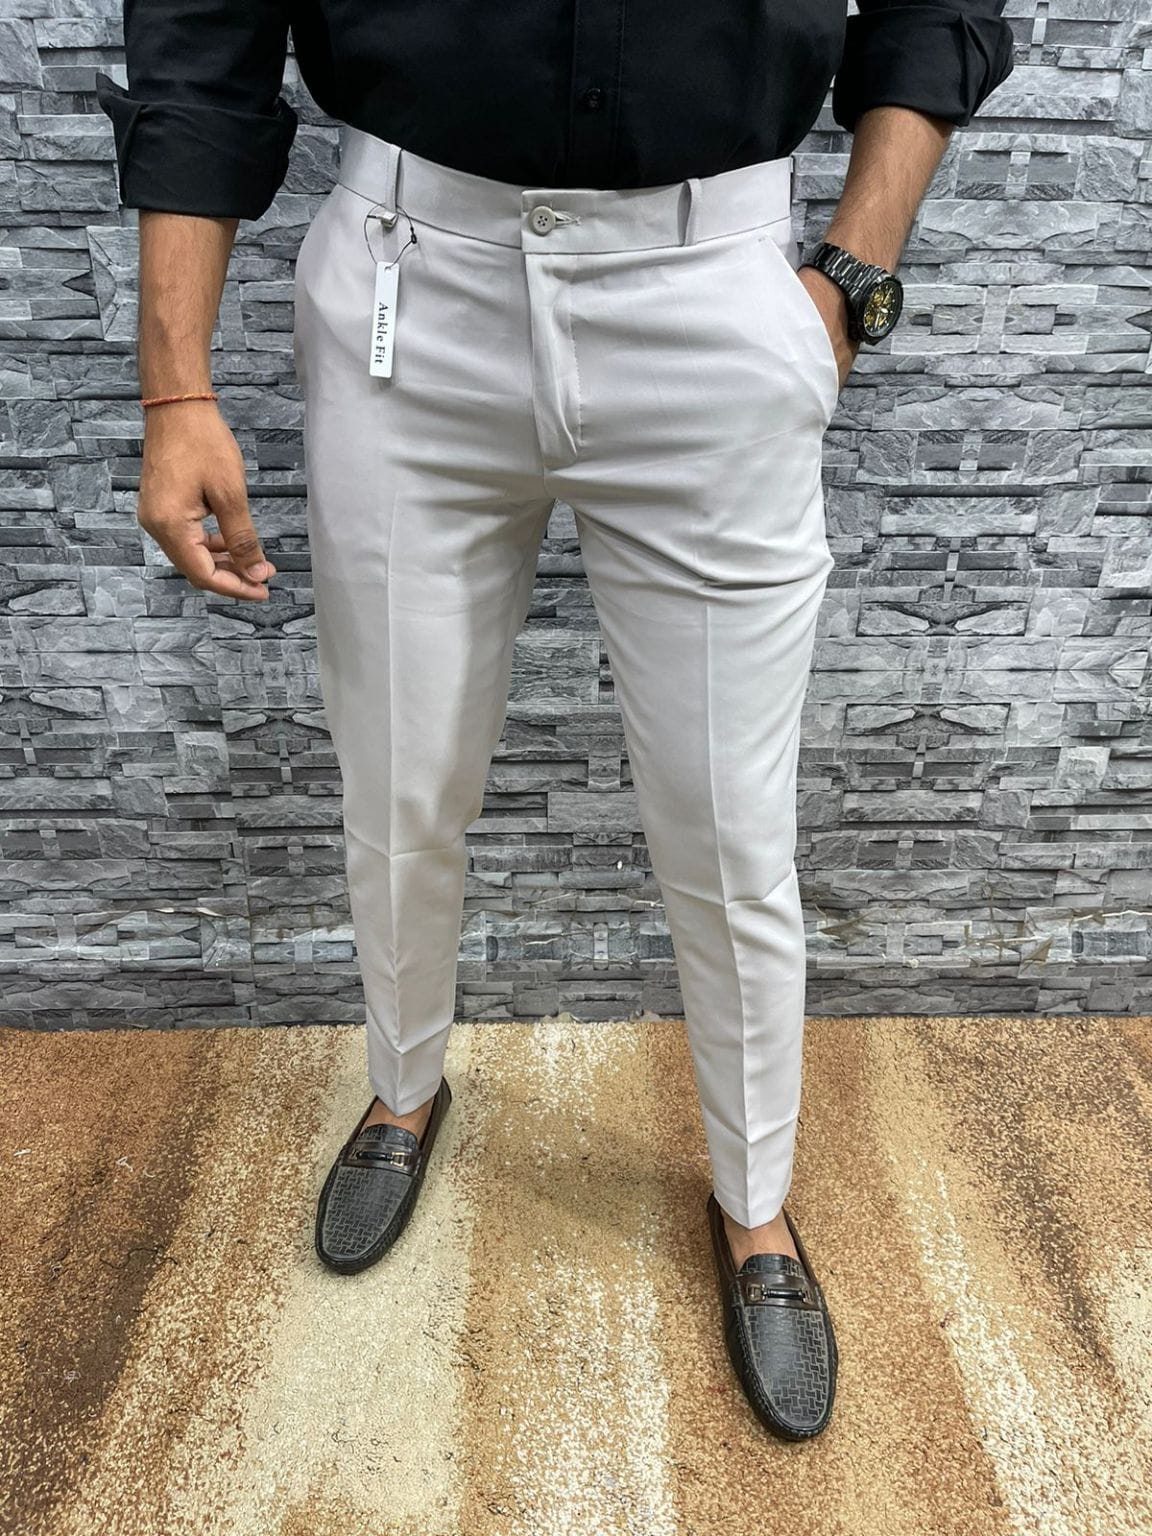 Buy PLOTTER Stretchable Slimfit Formal Trouser Men Beige - One Way Little  Stretchable Cotluk Lycra Formal Trouser for Gents - Ankle fit Formal Pant  for Men - 28 at Amazon.in